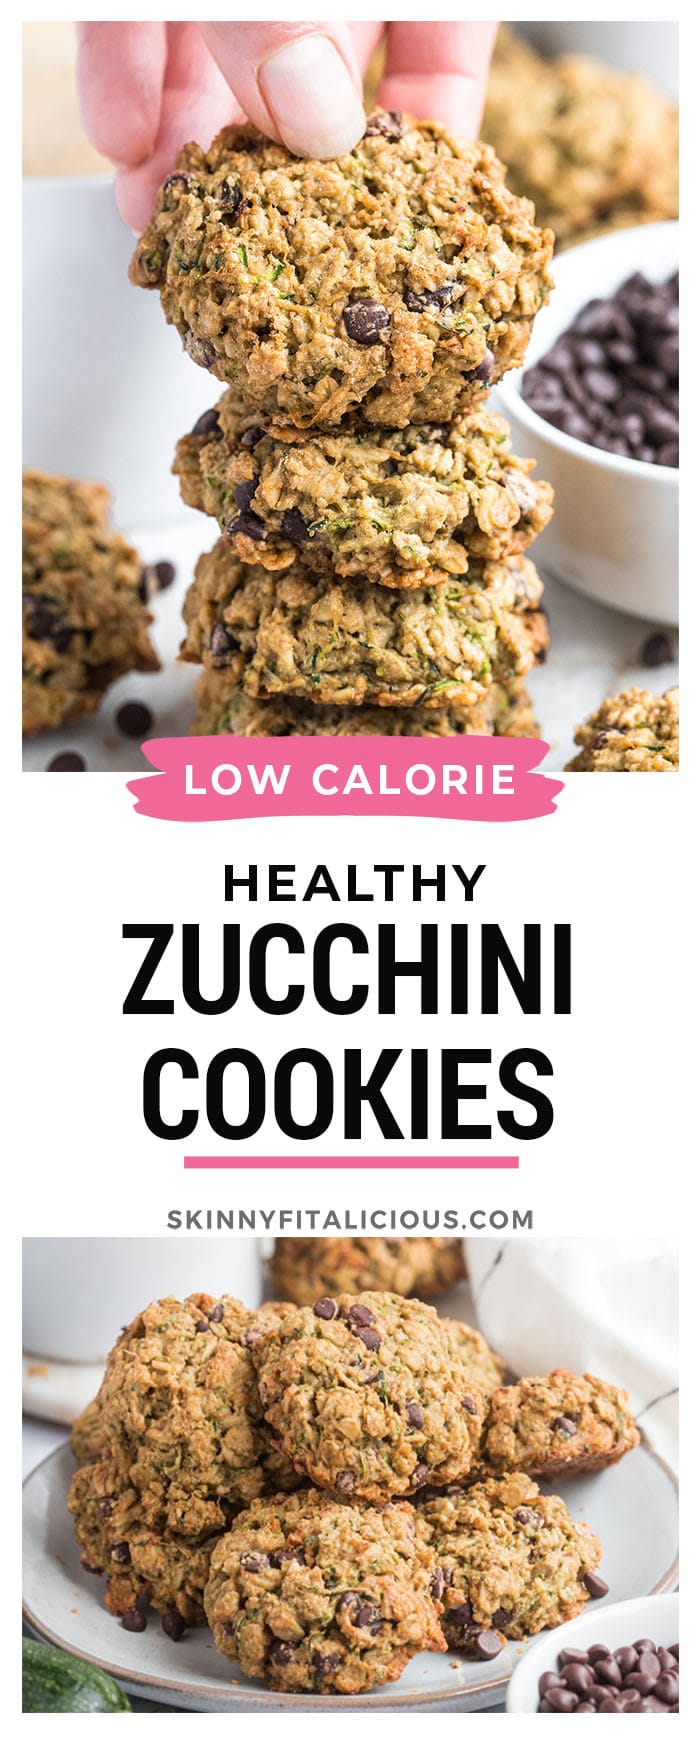 Healthy Zucchini Chocolate Cookies are low calorie, gluten free and packed with oats and chocolate flavor. A chewy, healthy oat cookie recipe that's kid approved. A sneaky way to eat your veggies!